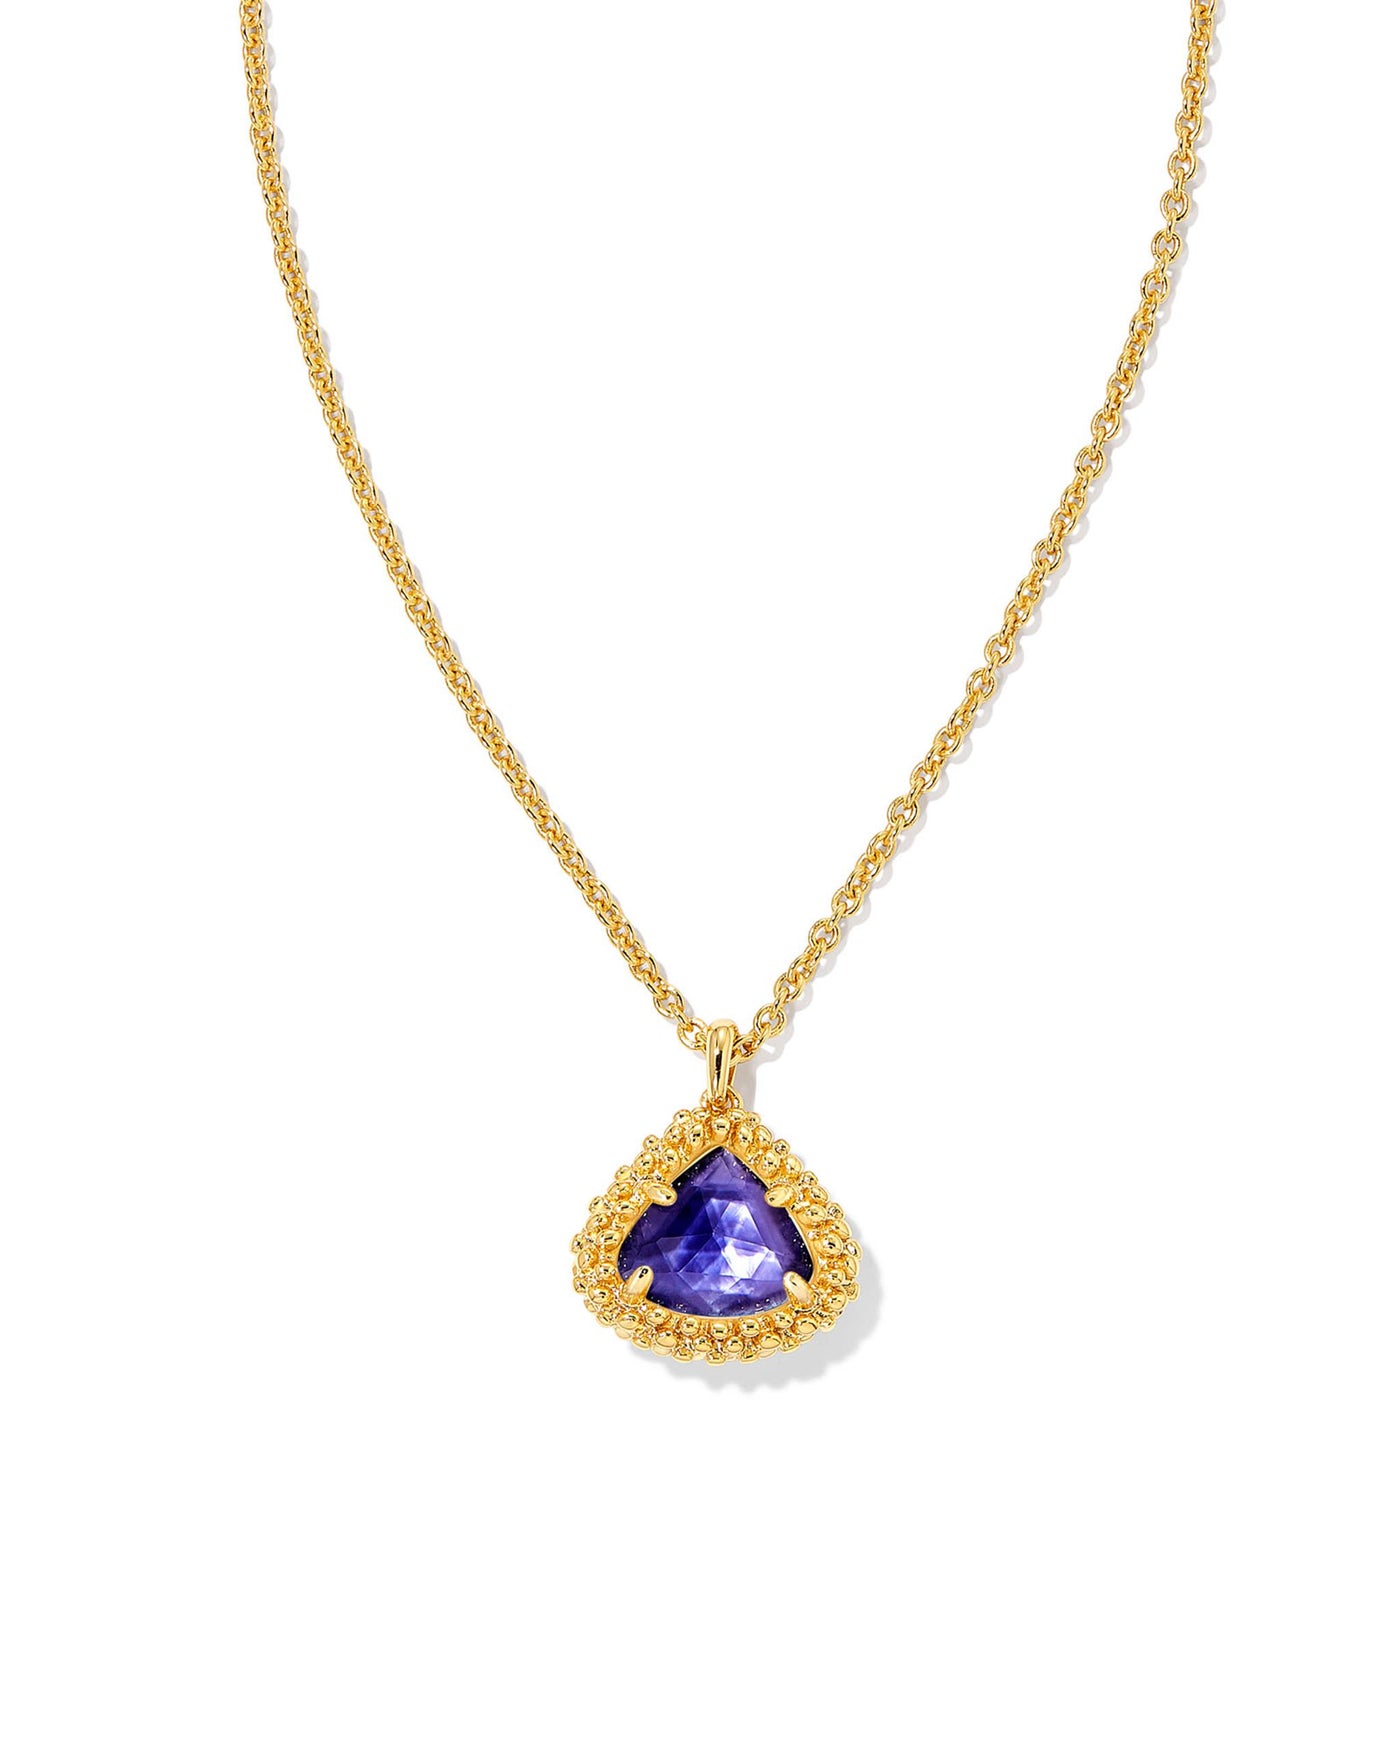 Gold Tone Necklace Featuring Dark Lavender Illusion by Kendra Scott